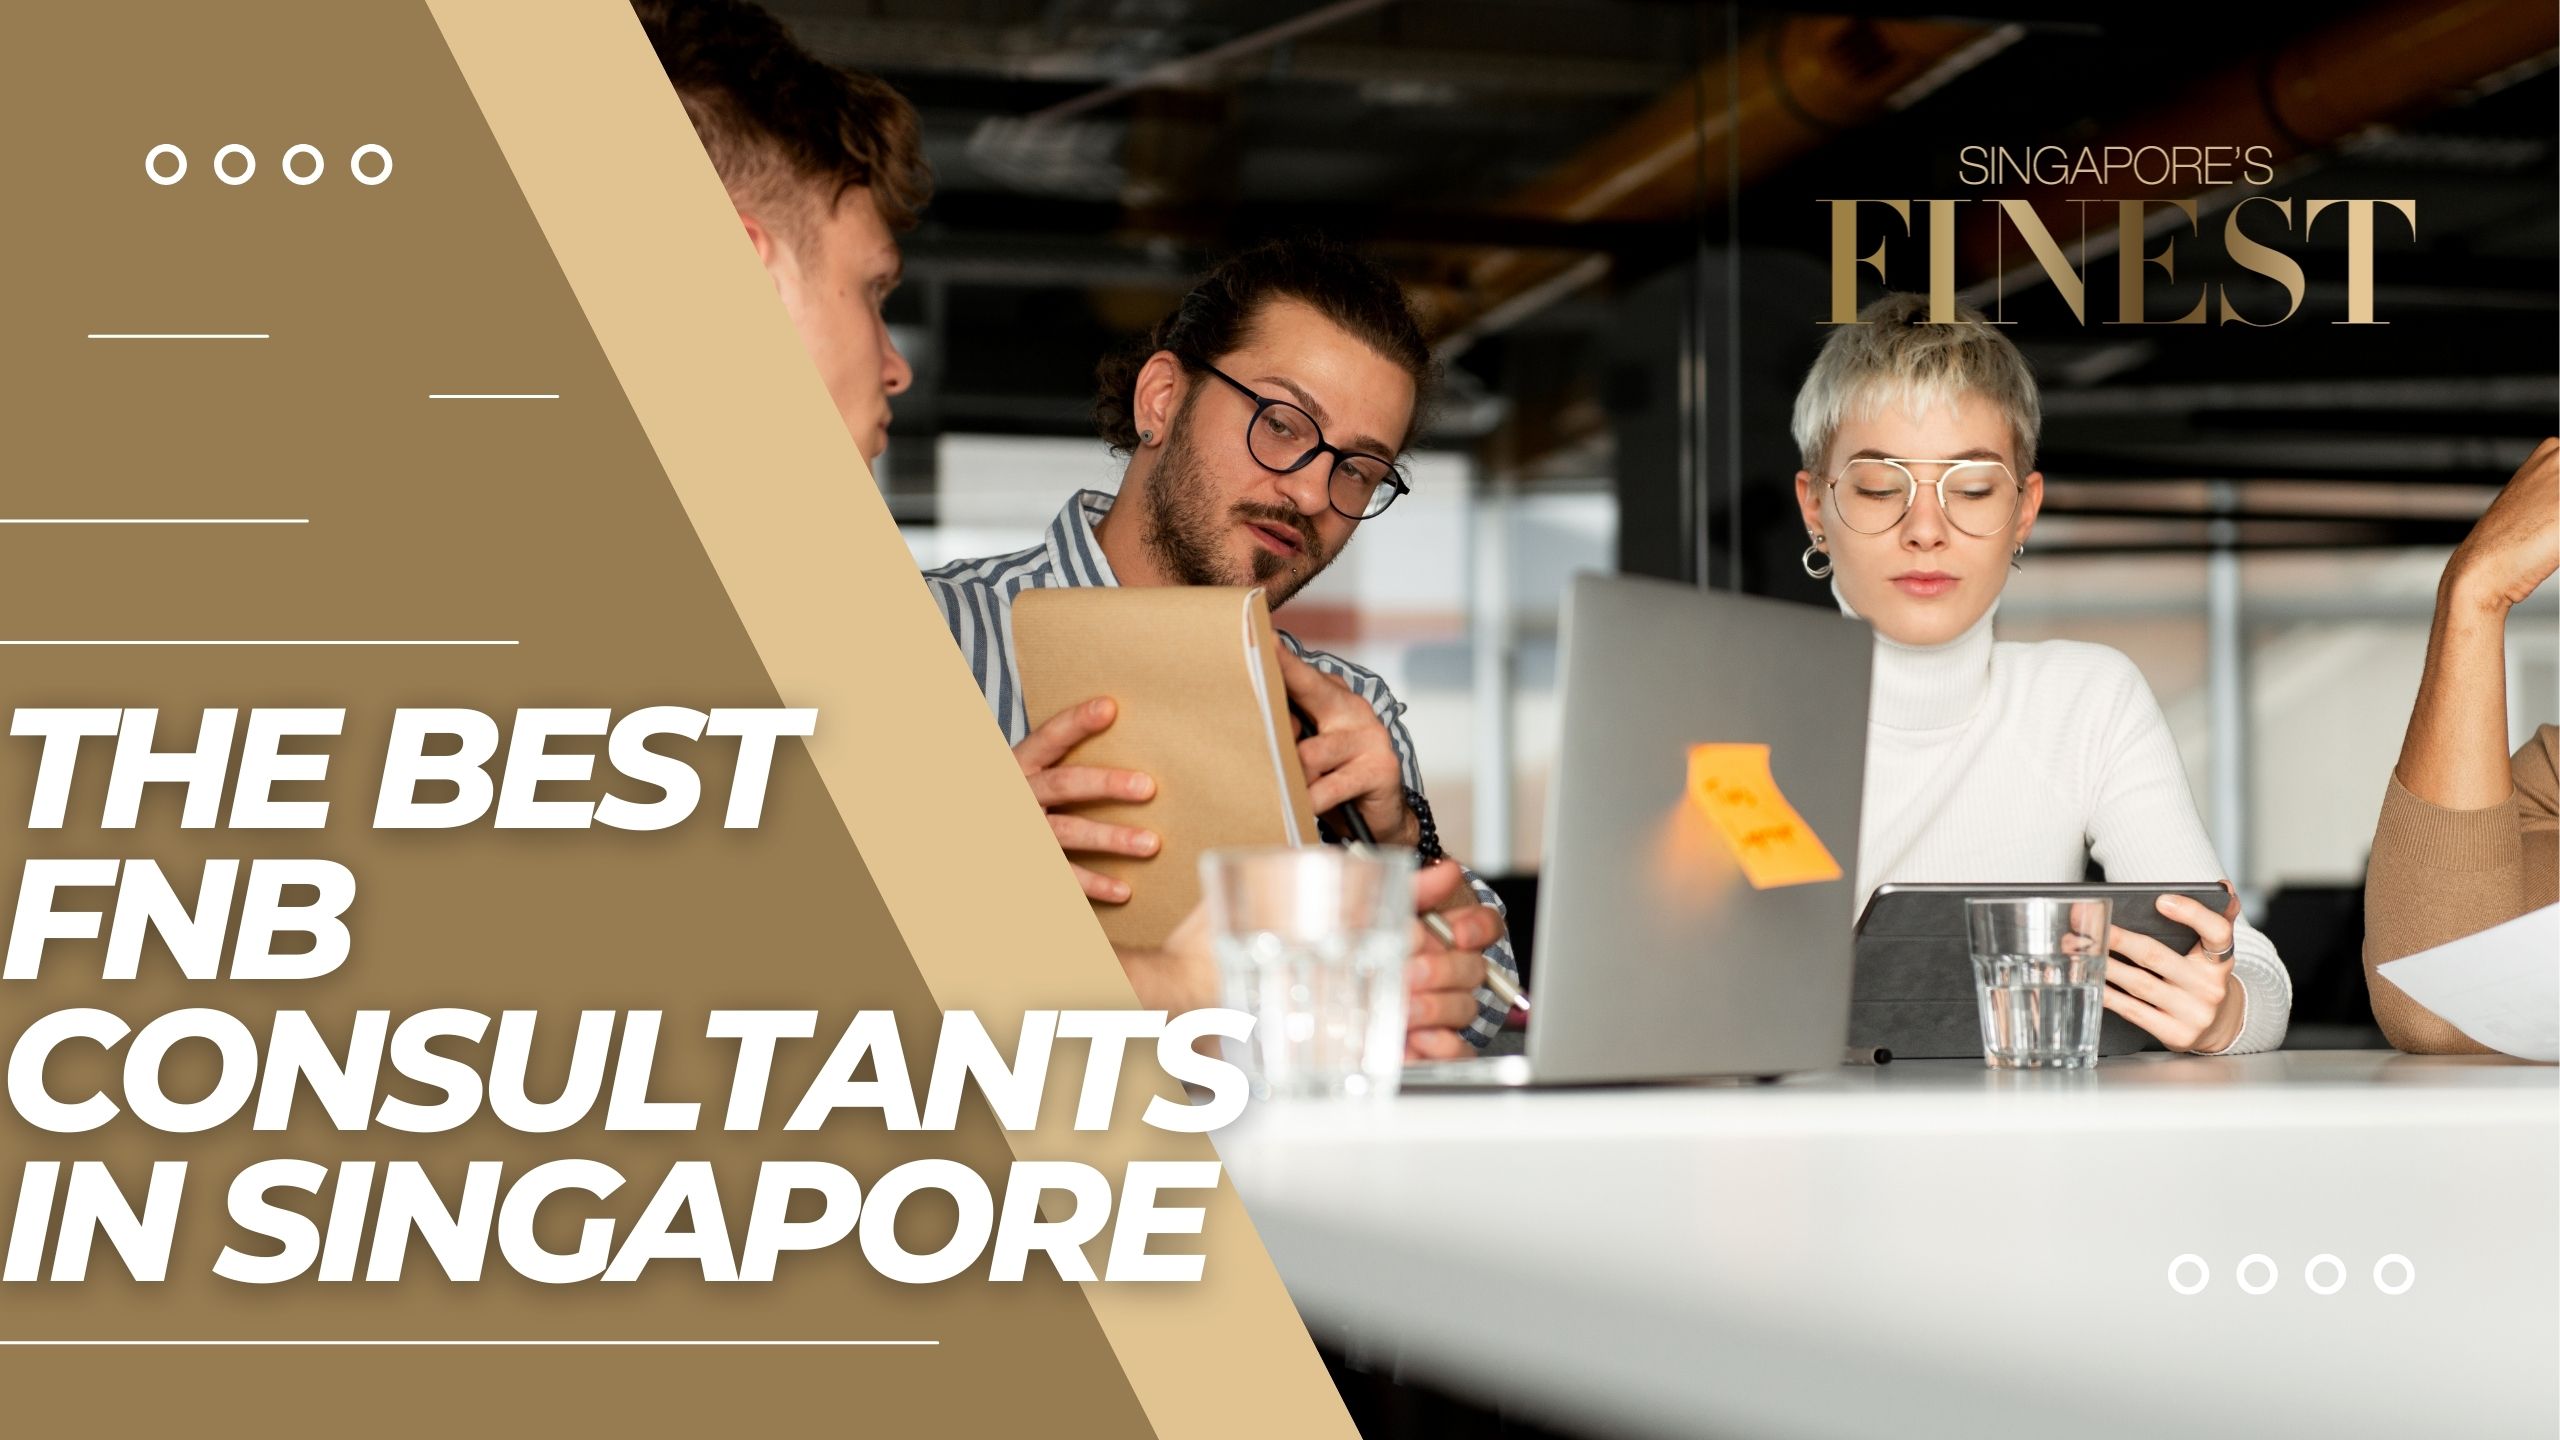 The Finest Food and Beverage Consultants in Singapore